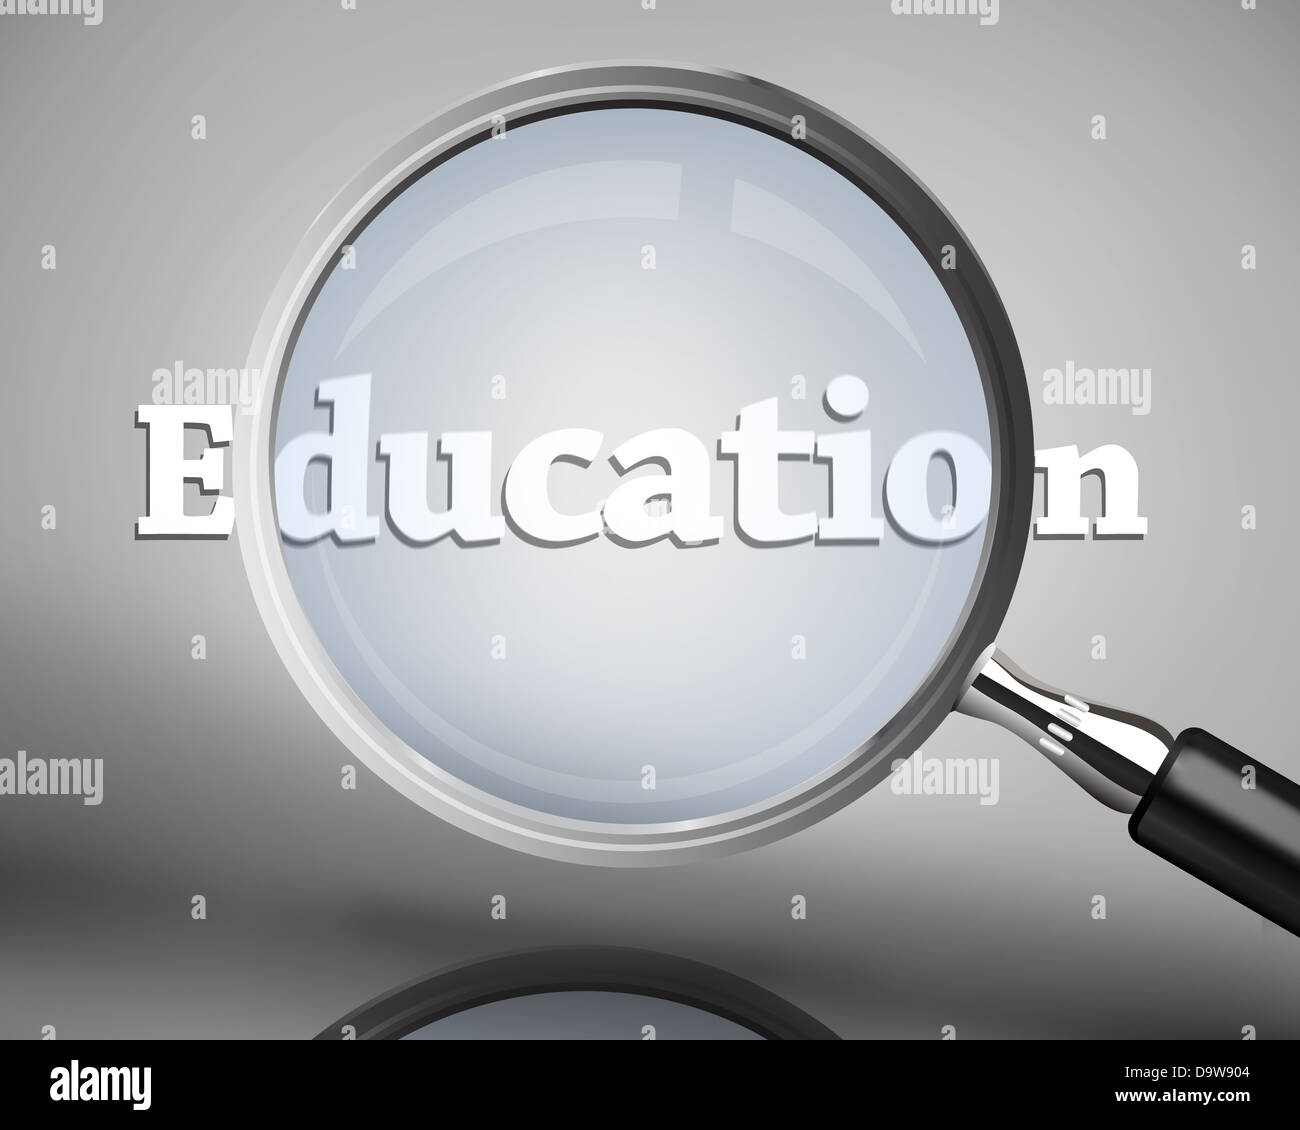 Magnifying glass showing education word in white Stock Photo